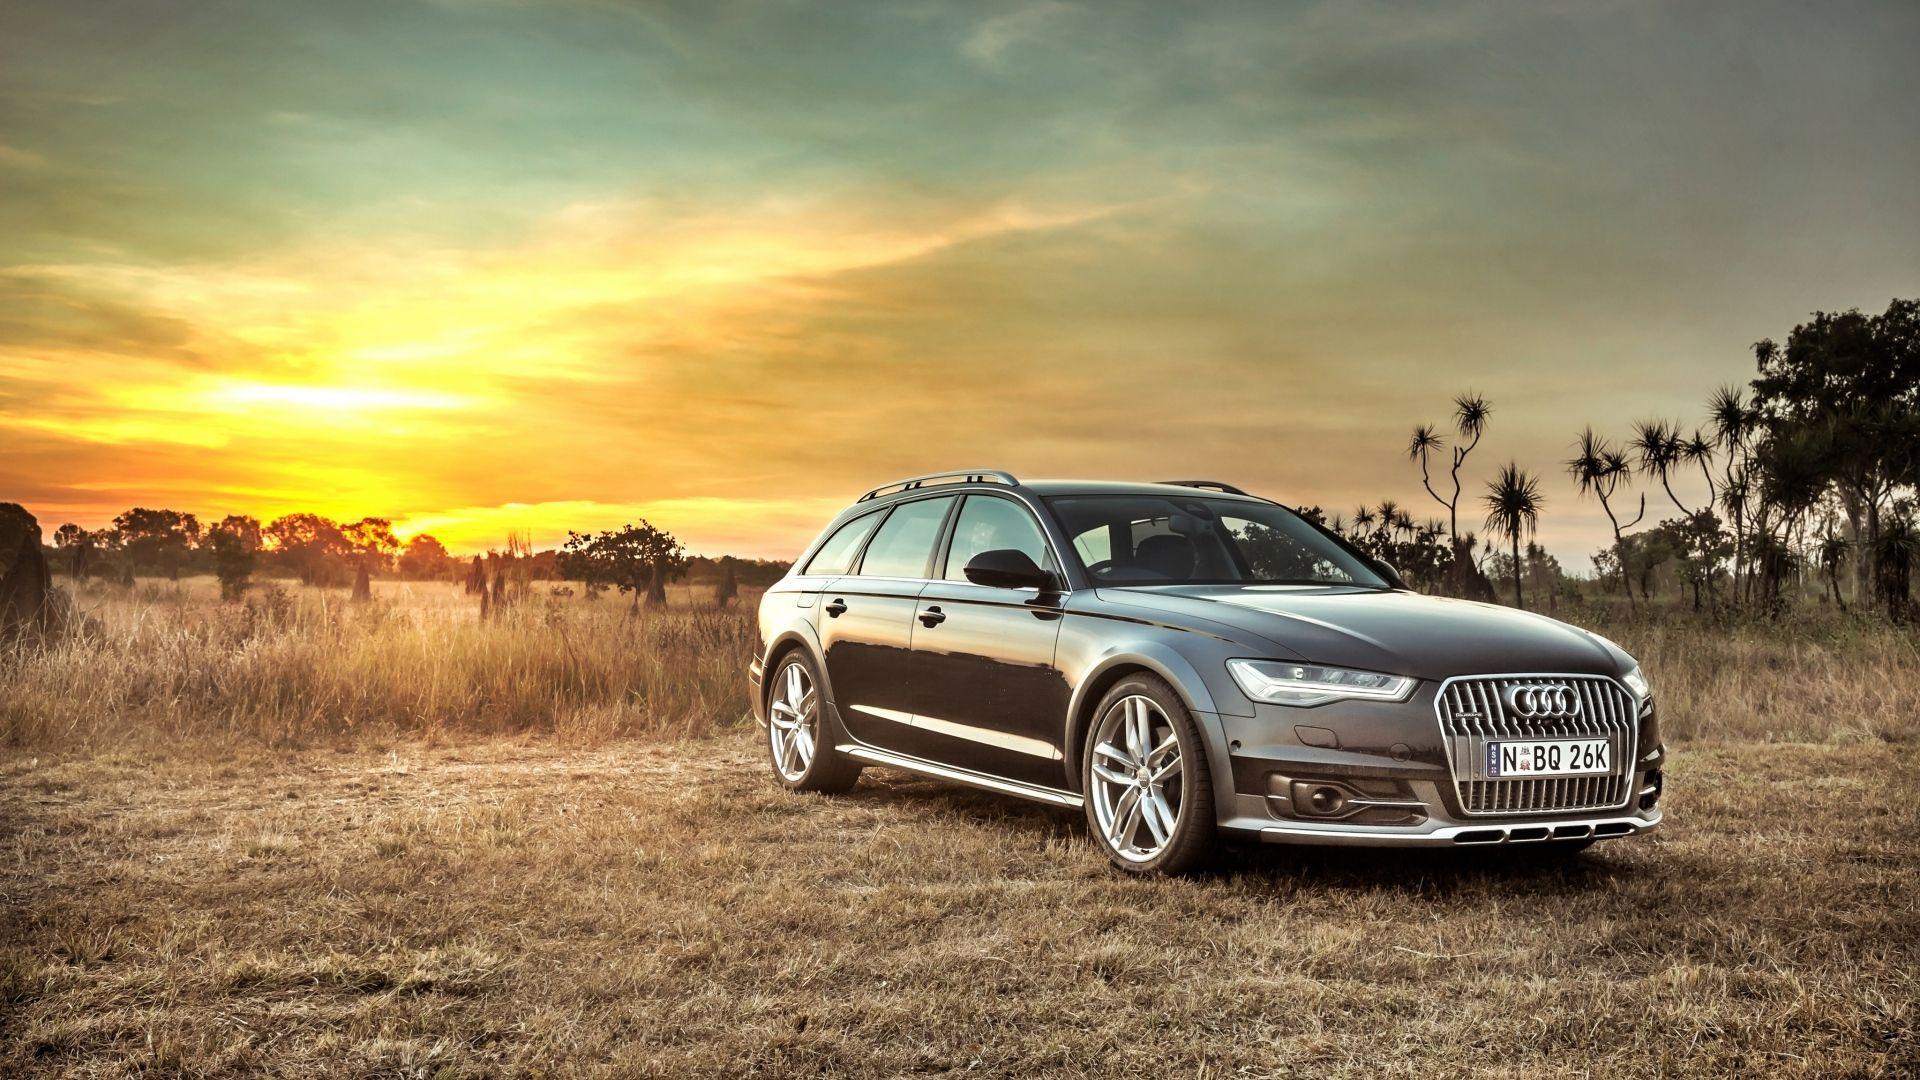 HD Background Audi A6 Allroad Side View Sunset HDR Car Wallpaper